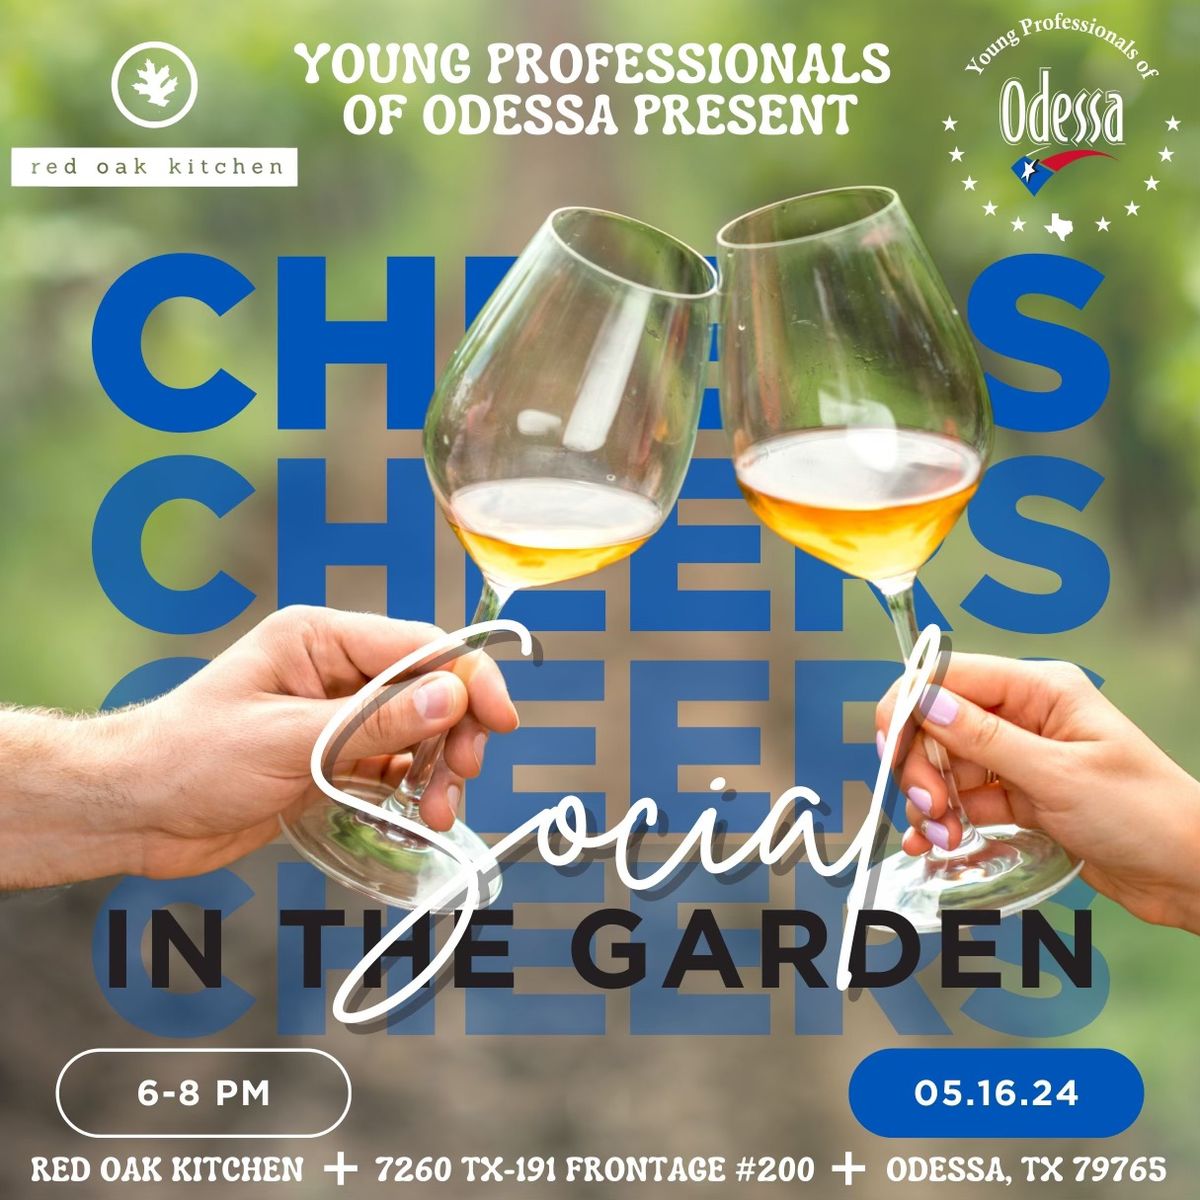 YPOdessa Networking Mixer - Social in the Garden at Red Oak Kitchen 